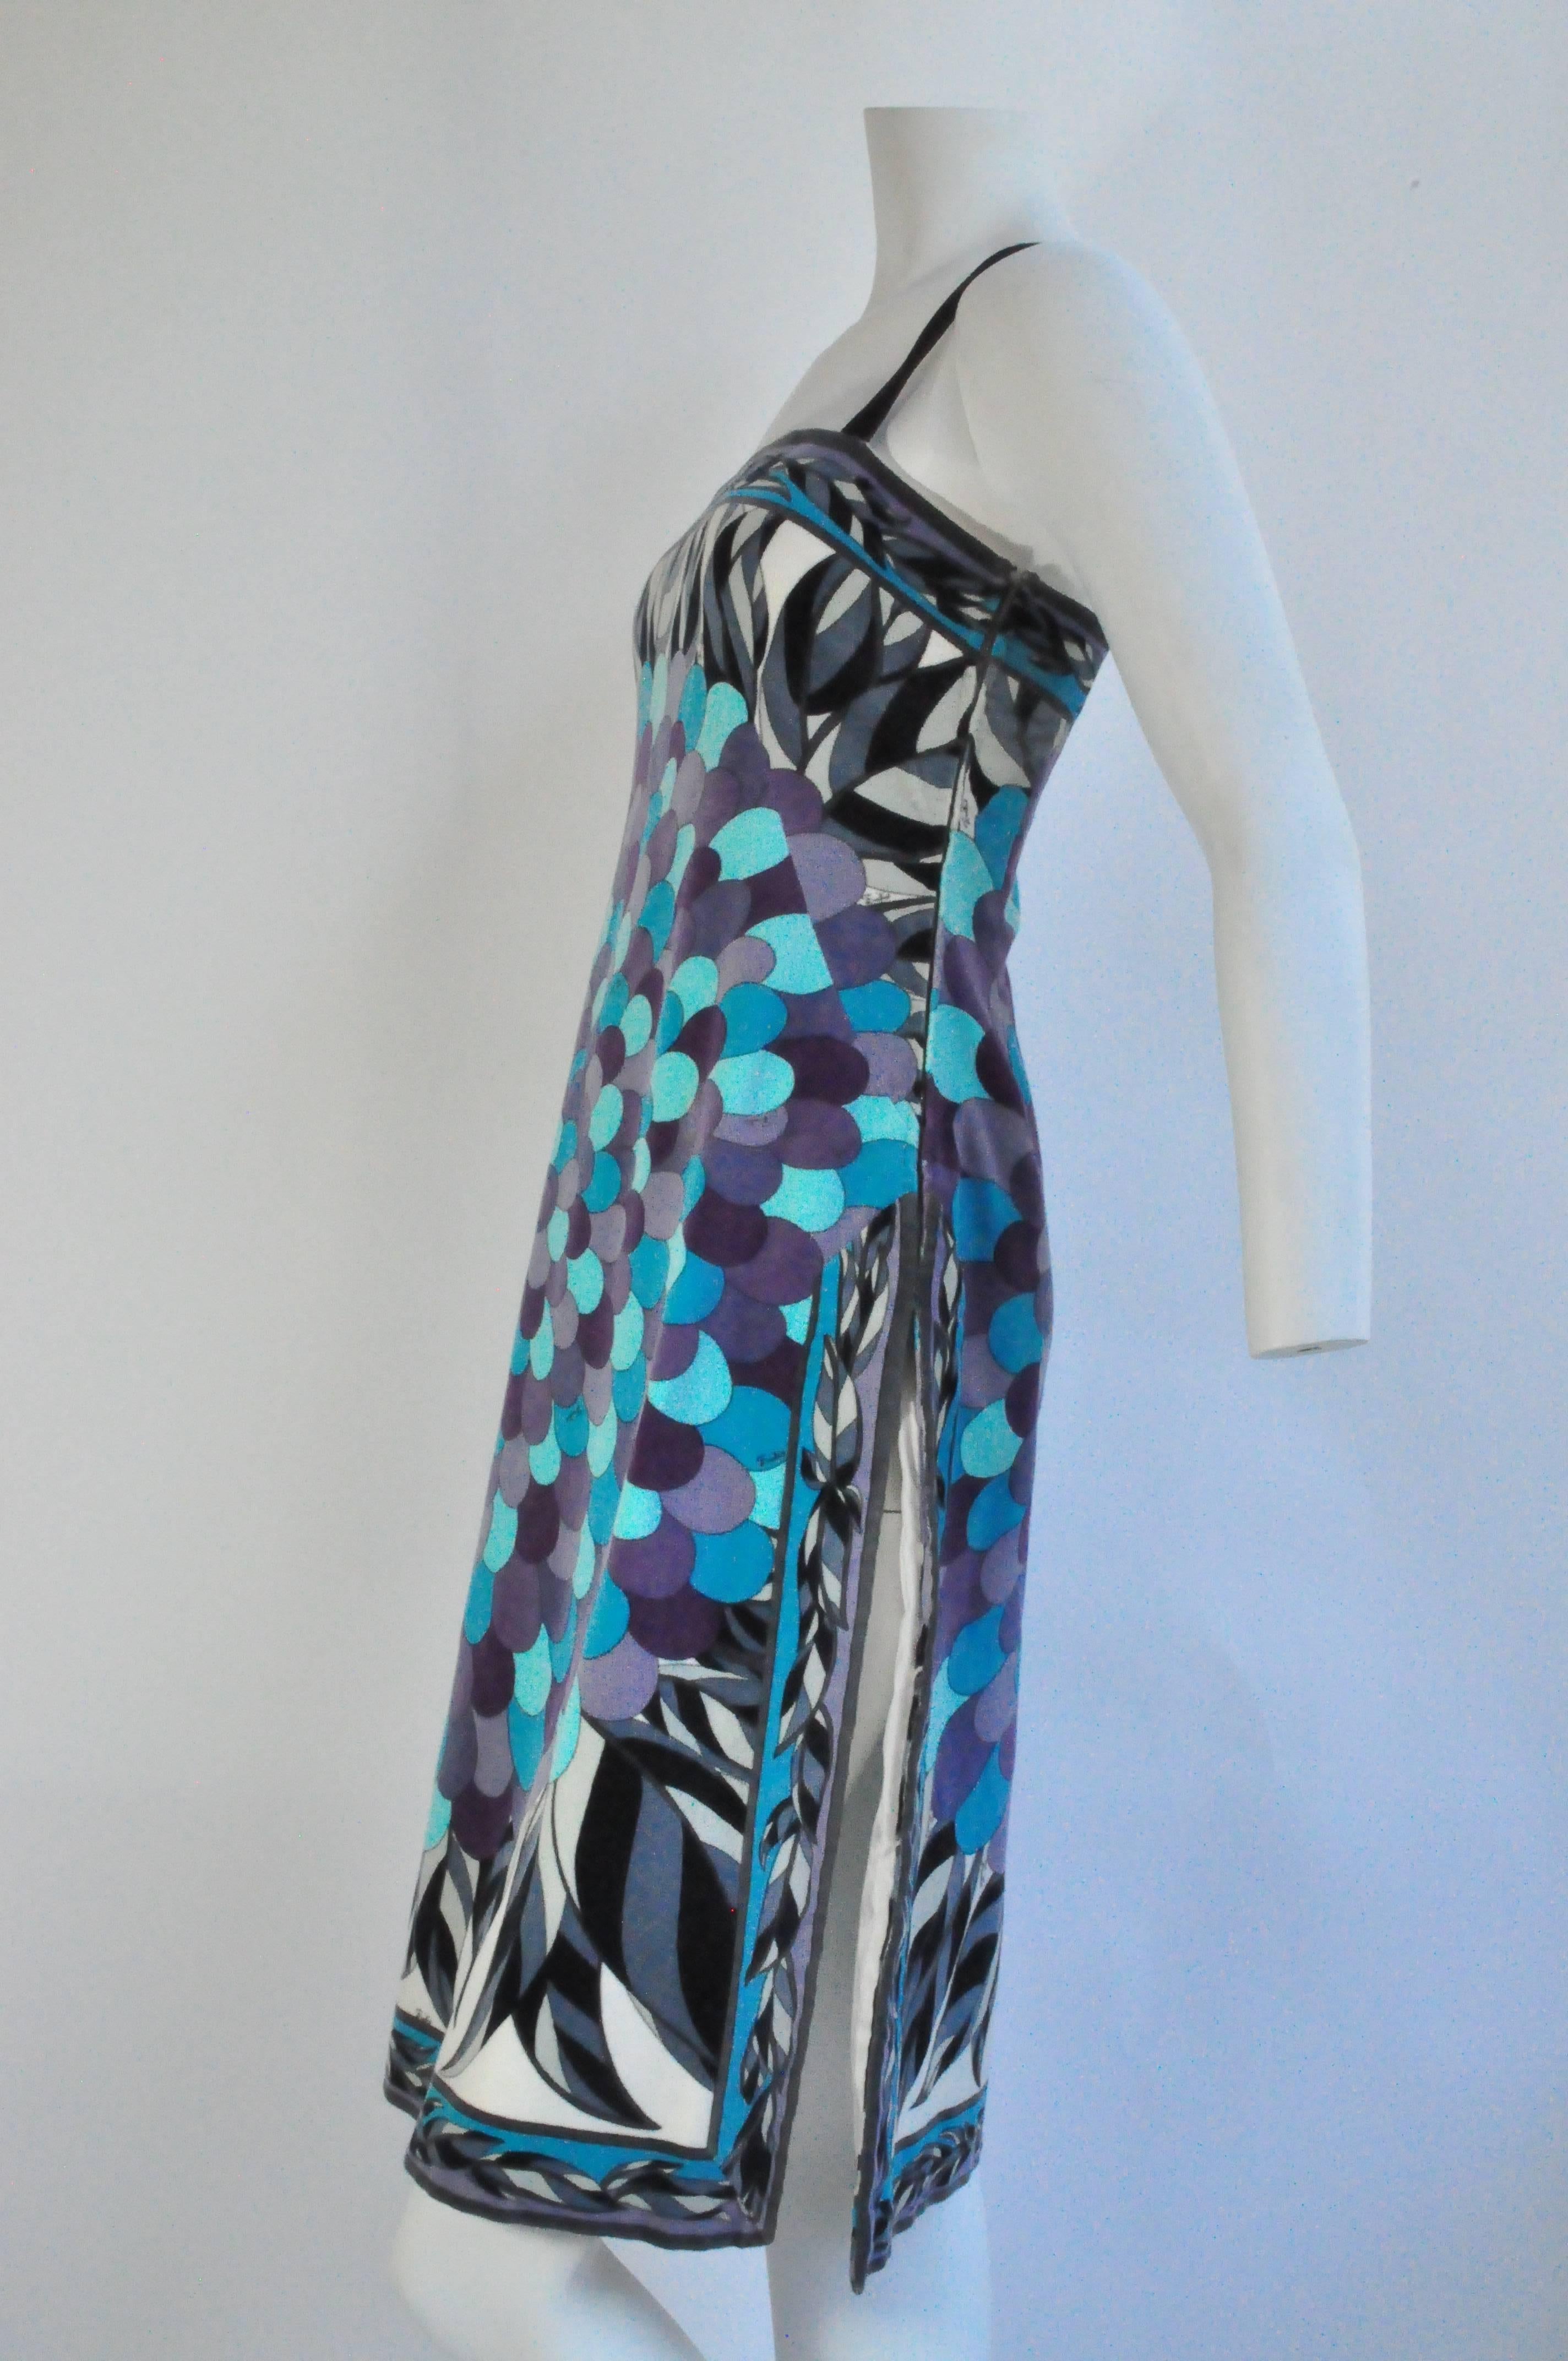 A vintage velvet Emilio Pucci day dress with spaghetti straps and a dramatic side slit up the left leg. Features a fantastical floral and leaf print in a color palette of greenish blues, purples, gray, sage green, white and black. Entirely lined at